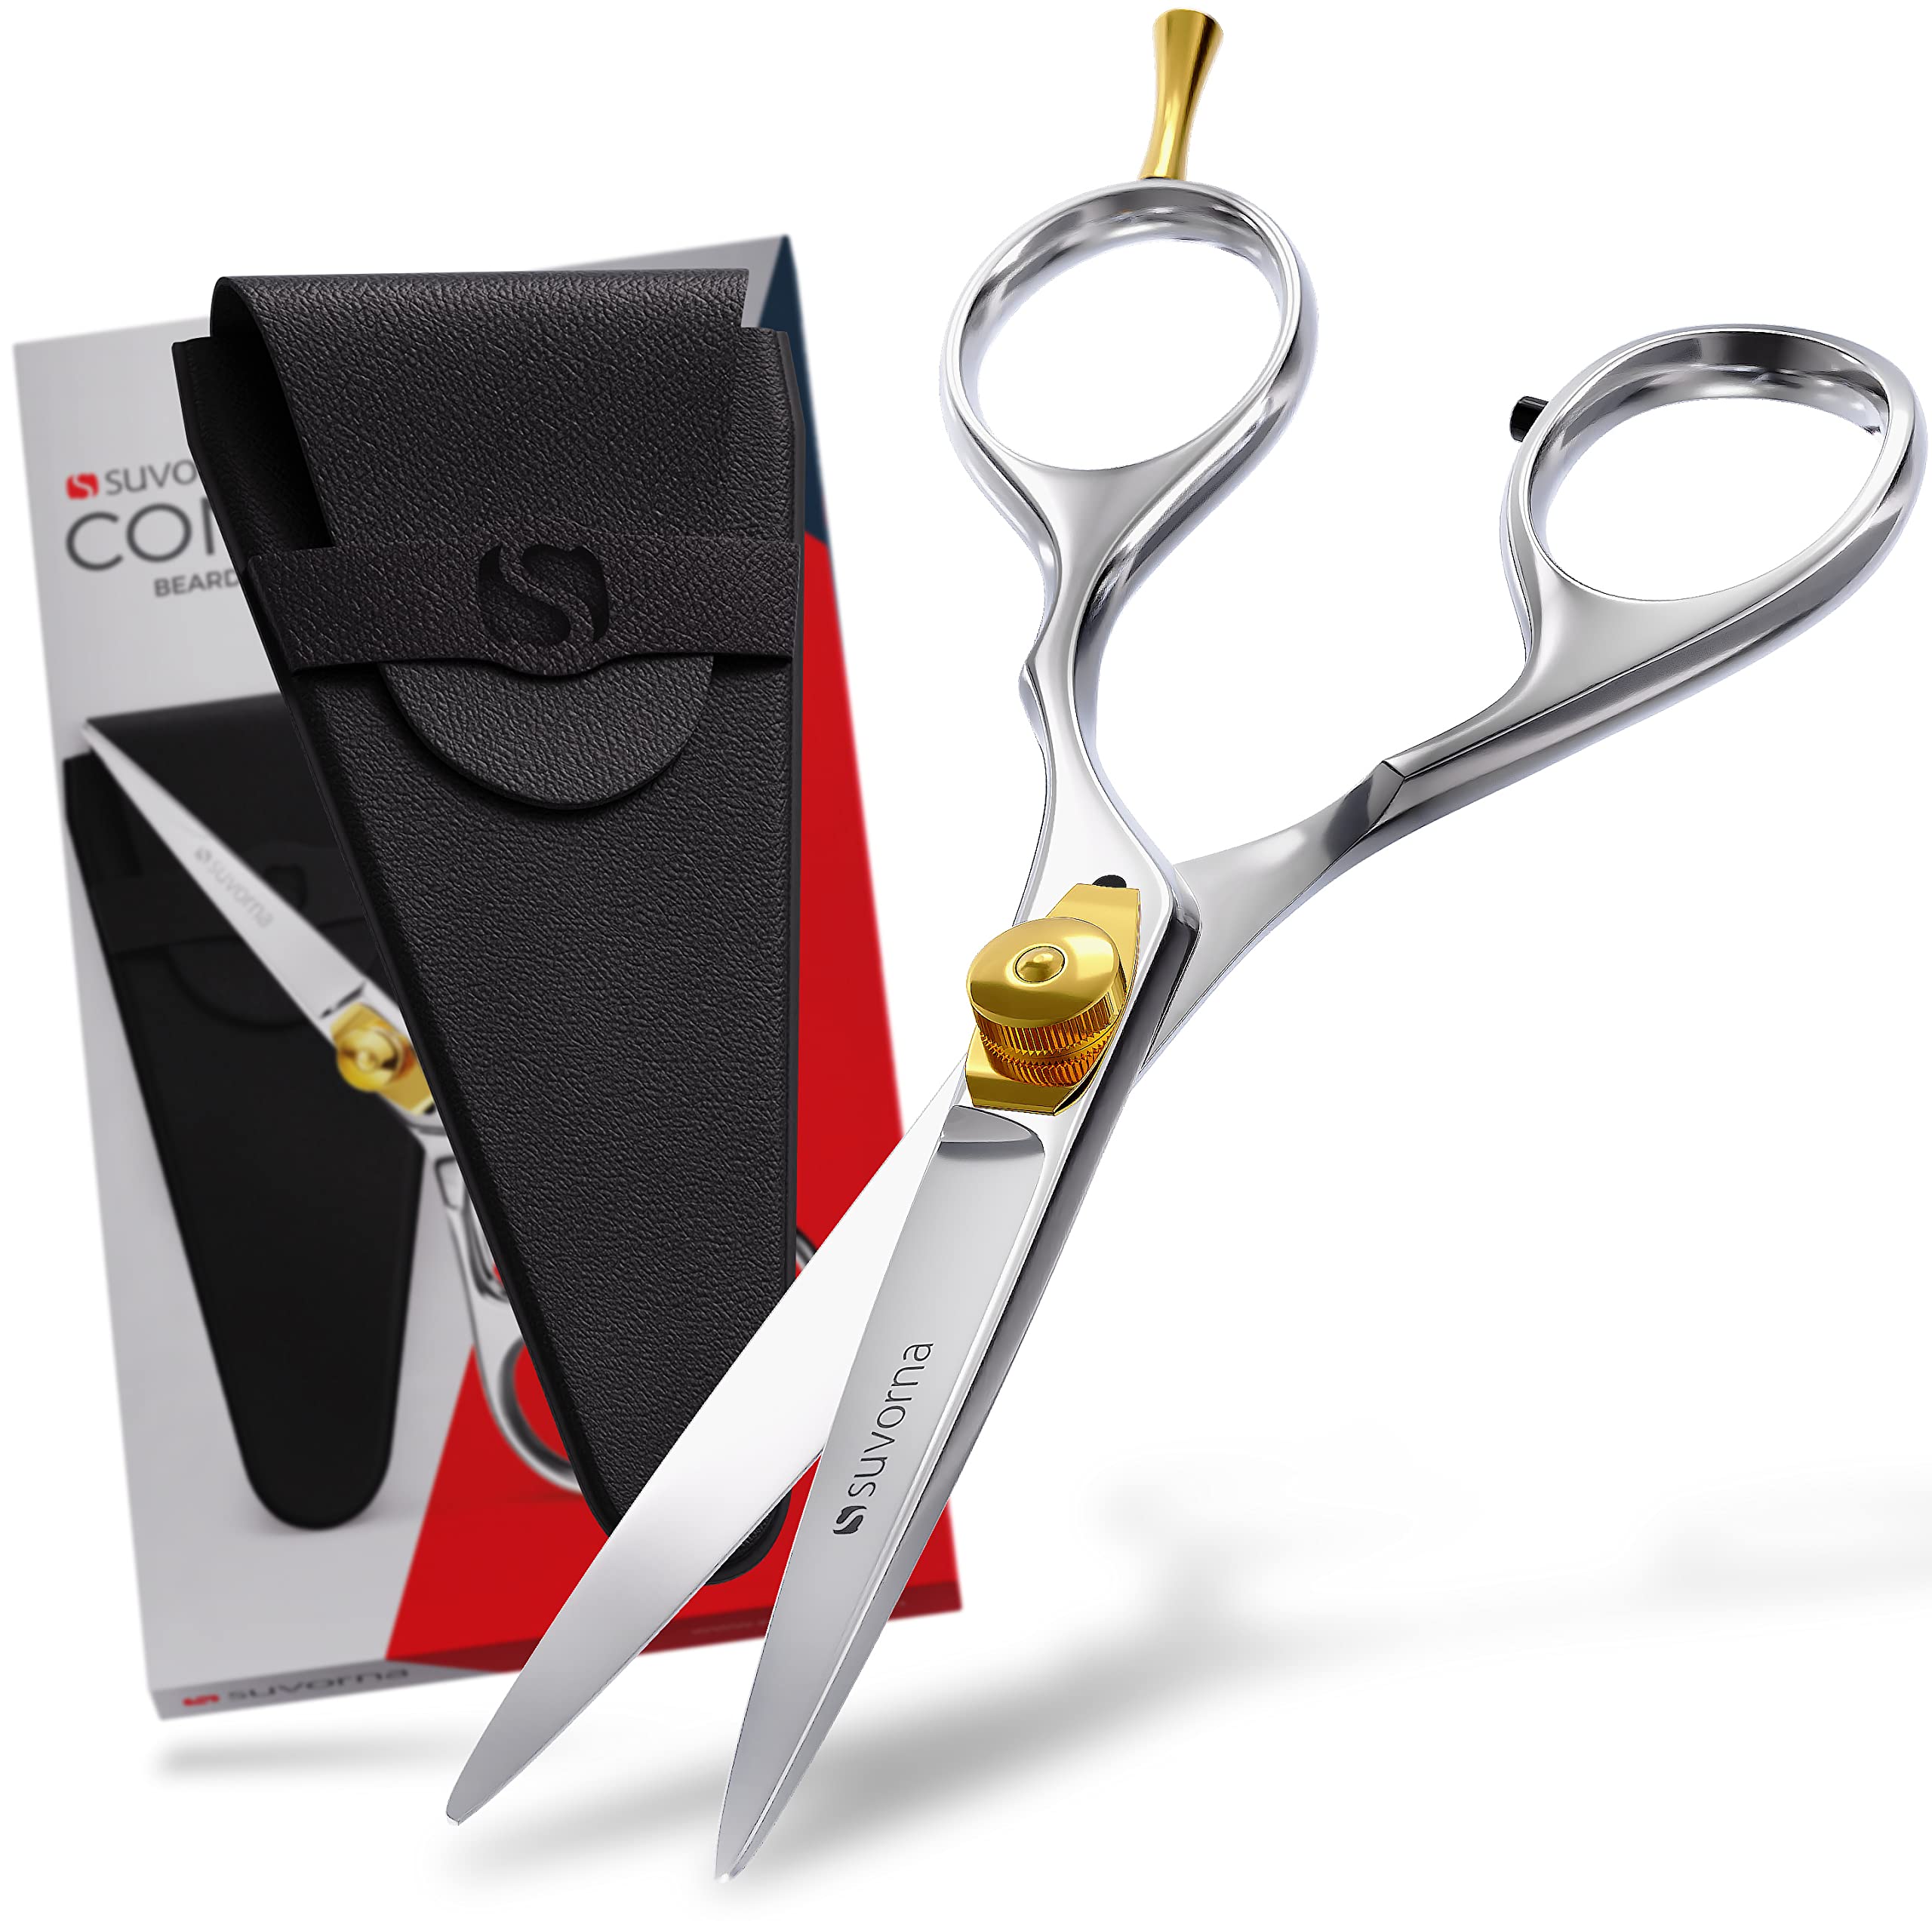  Suvorna 5.5 hair cutting scissors for professional, barber &  hairdresser - hair shears for cutting, trimming, grooming, precision,  facial hair - Right Hand hair scissors for men, women, kids, adults. 